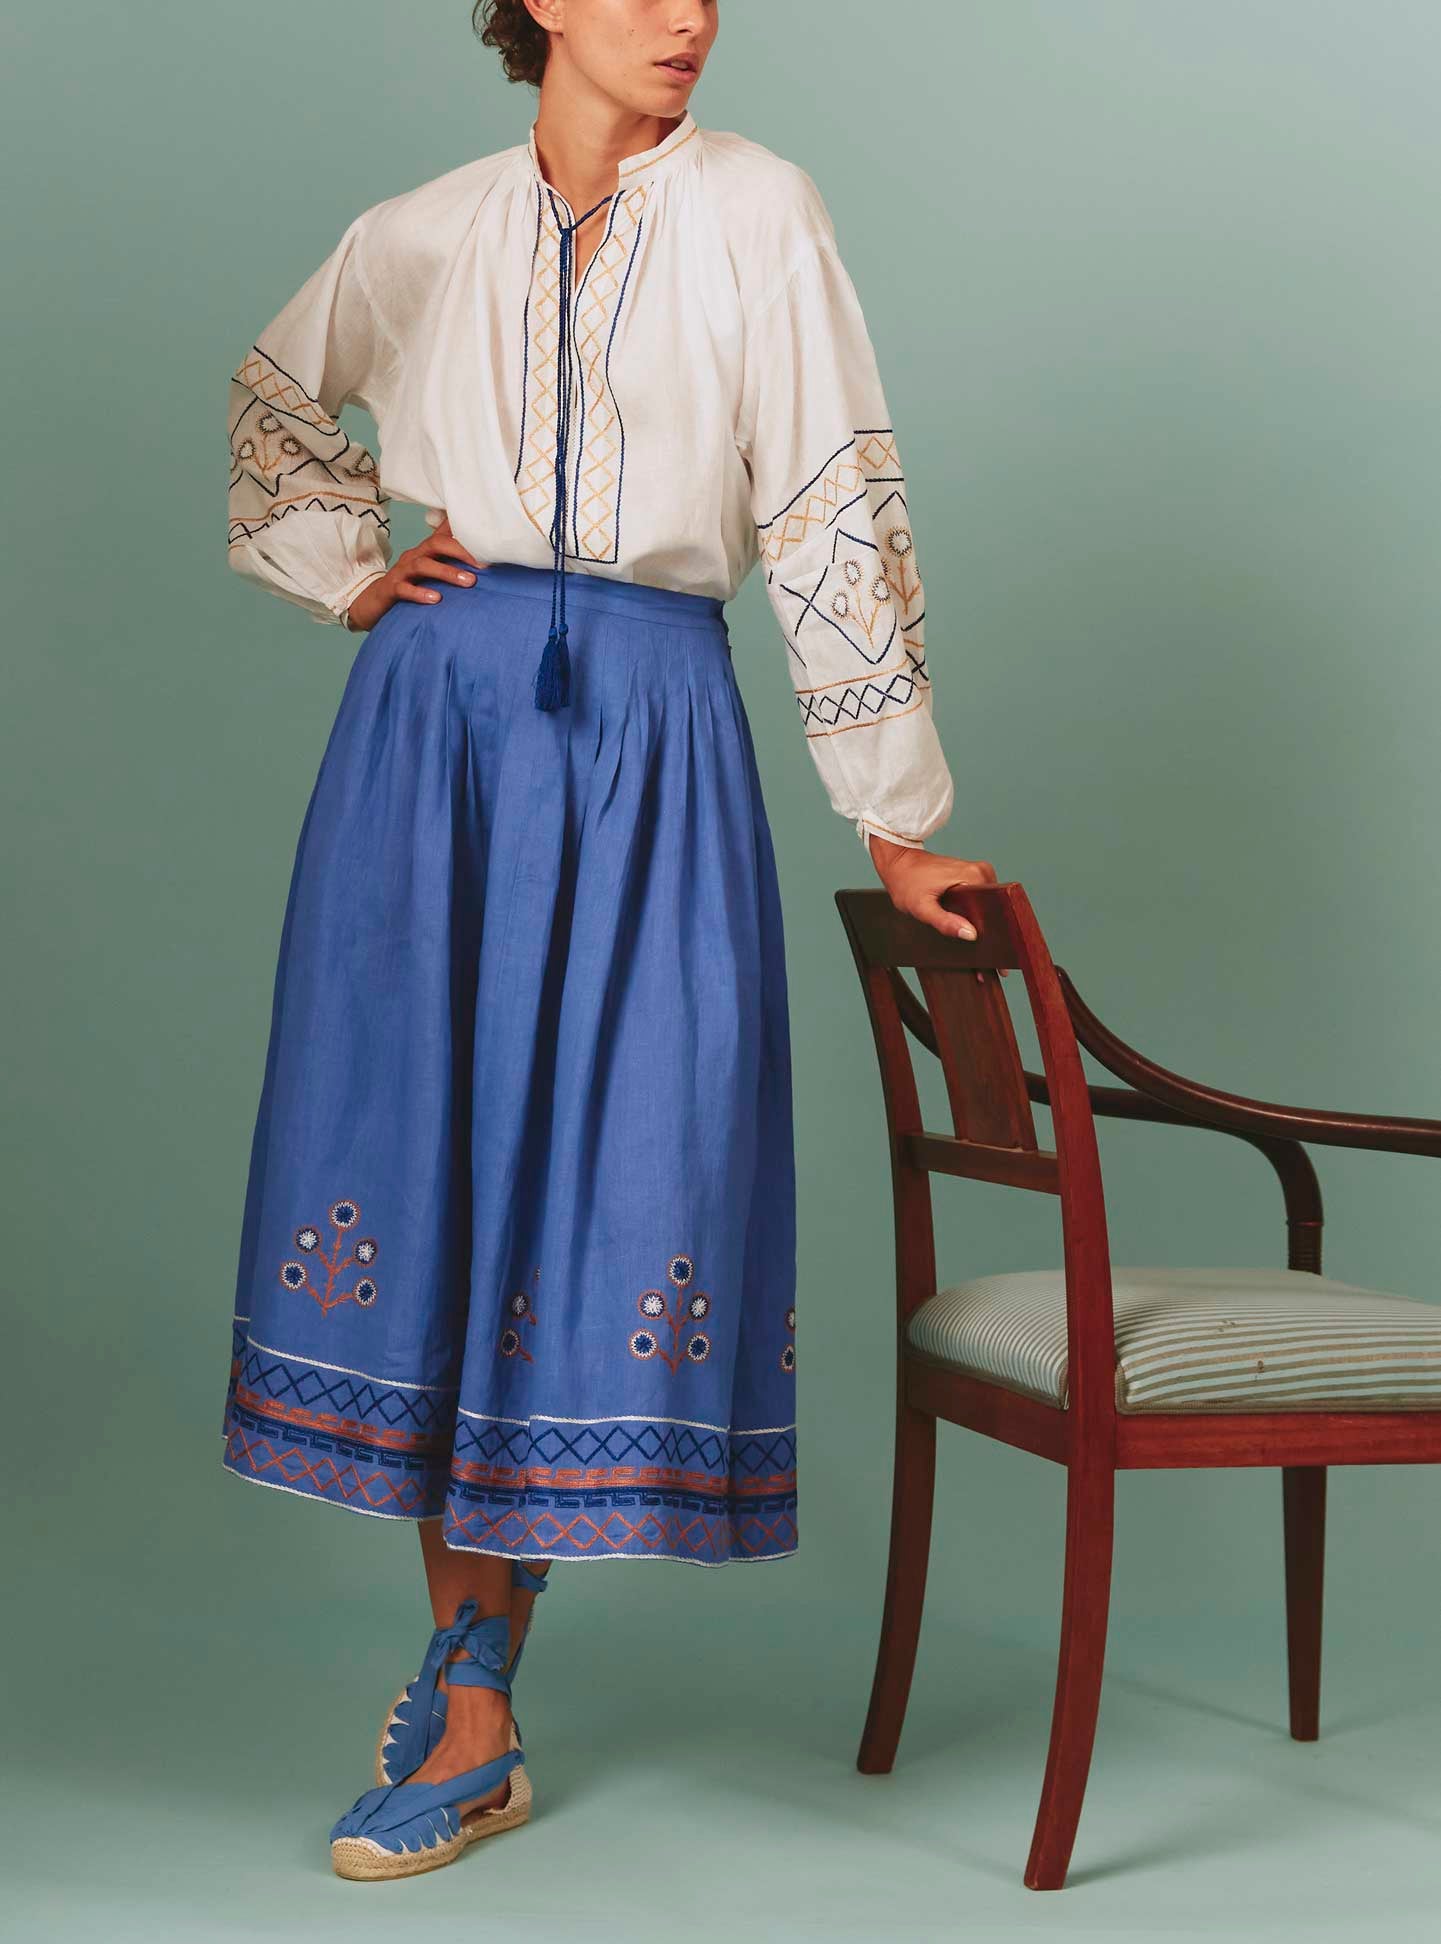 Large view of Lavender Zazou Skirt with White Guise Blouse: Archaic Embroidery by Thierry Colson